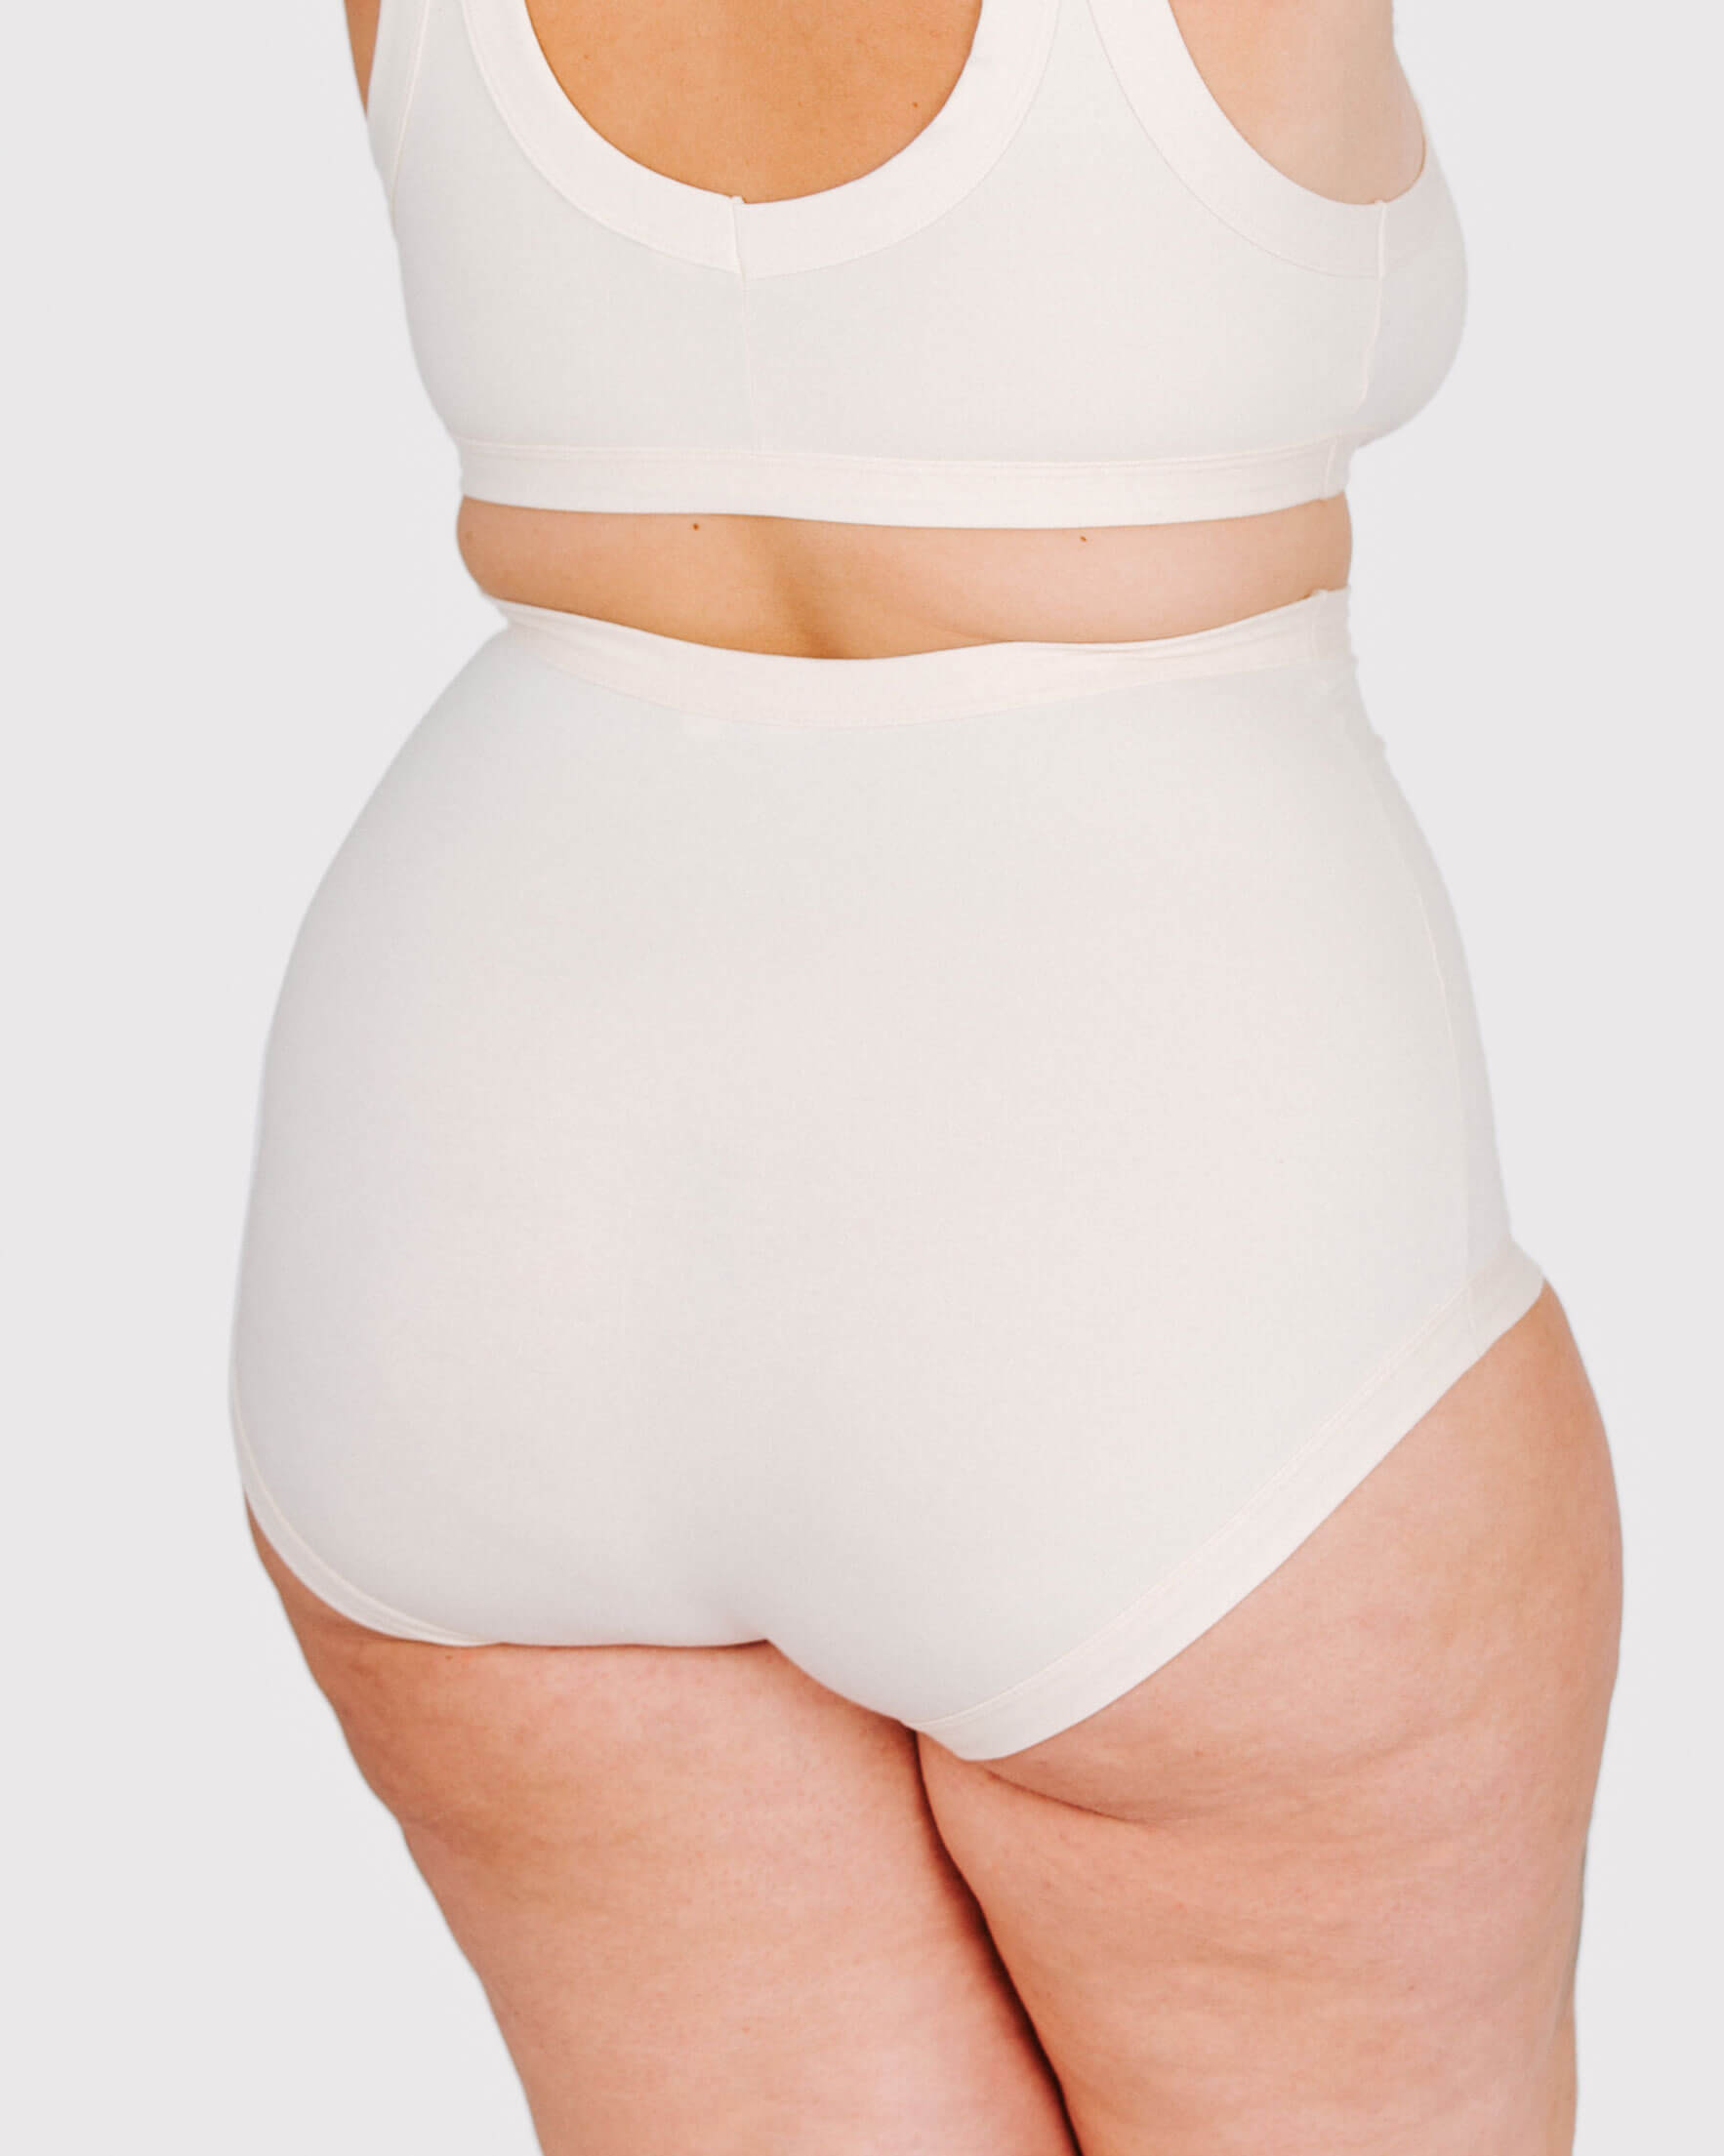 Fit photo from the back of Thunderpants organic cotton Sky Rise style underwear in off-white, showing a wedgie-free bum, on a model